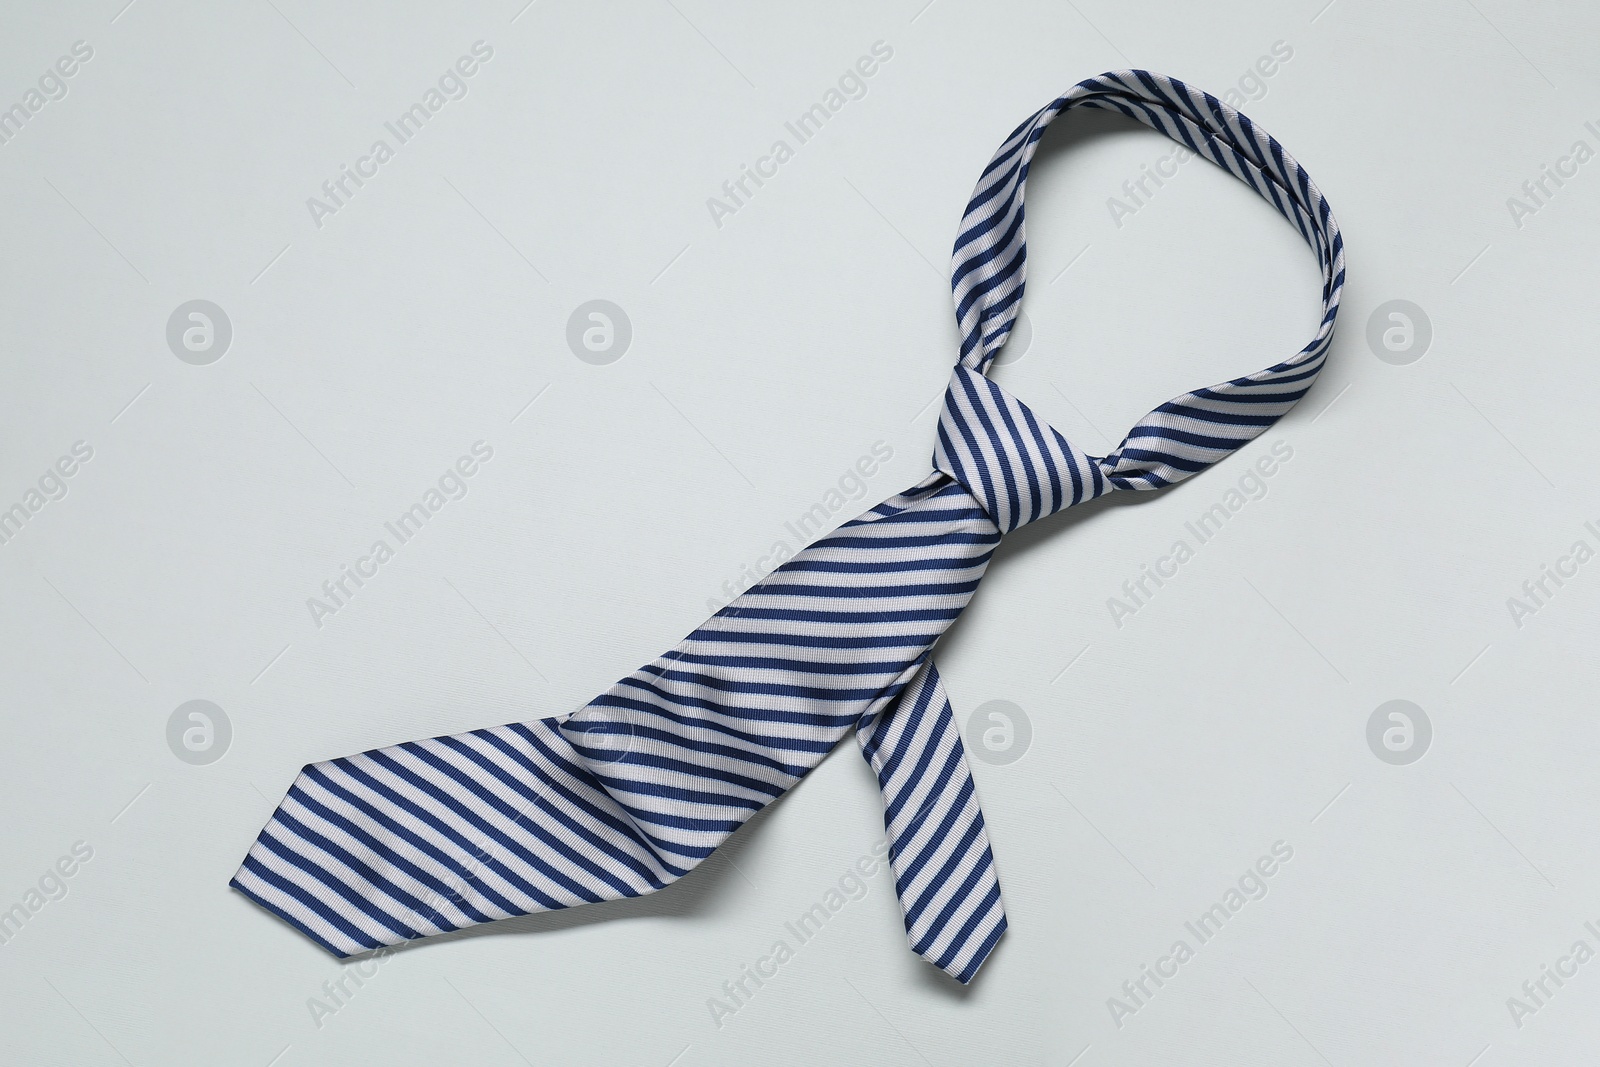 Photo of Striped necktie on light background, top view